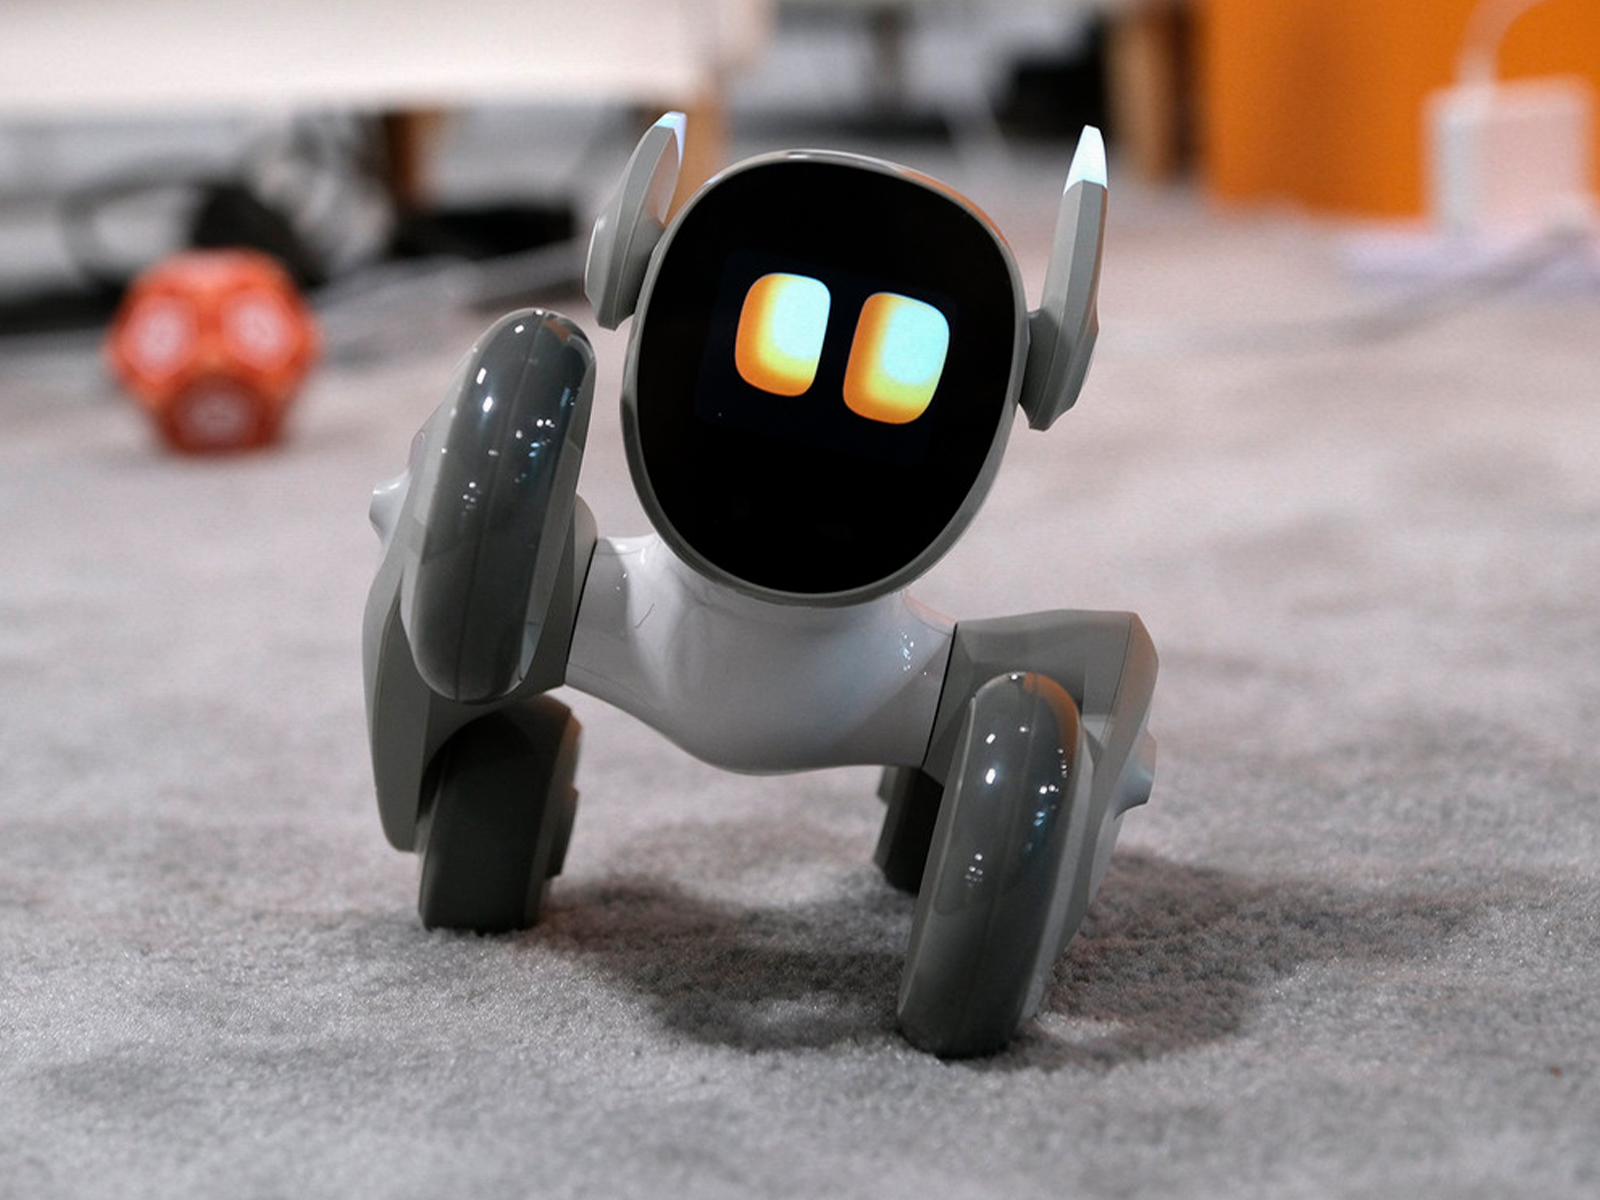 This is Loona, the pet-robot that you need